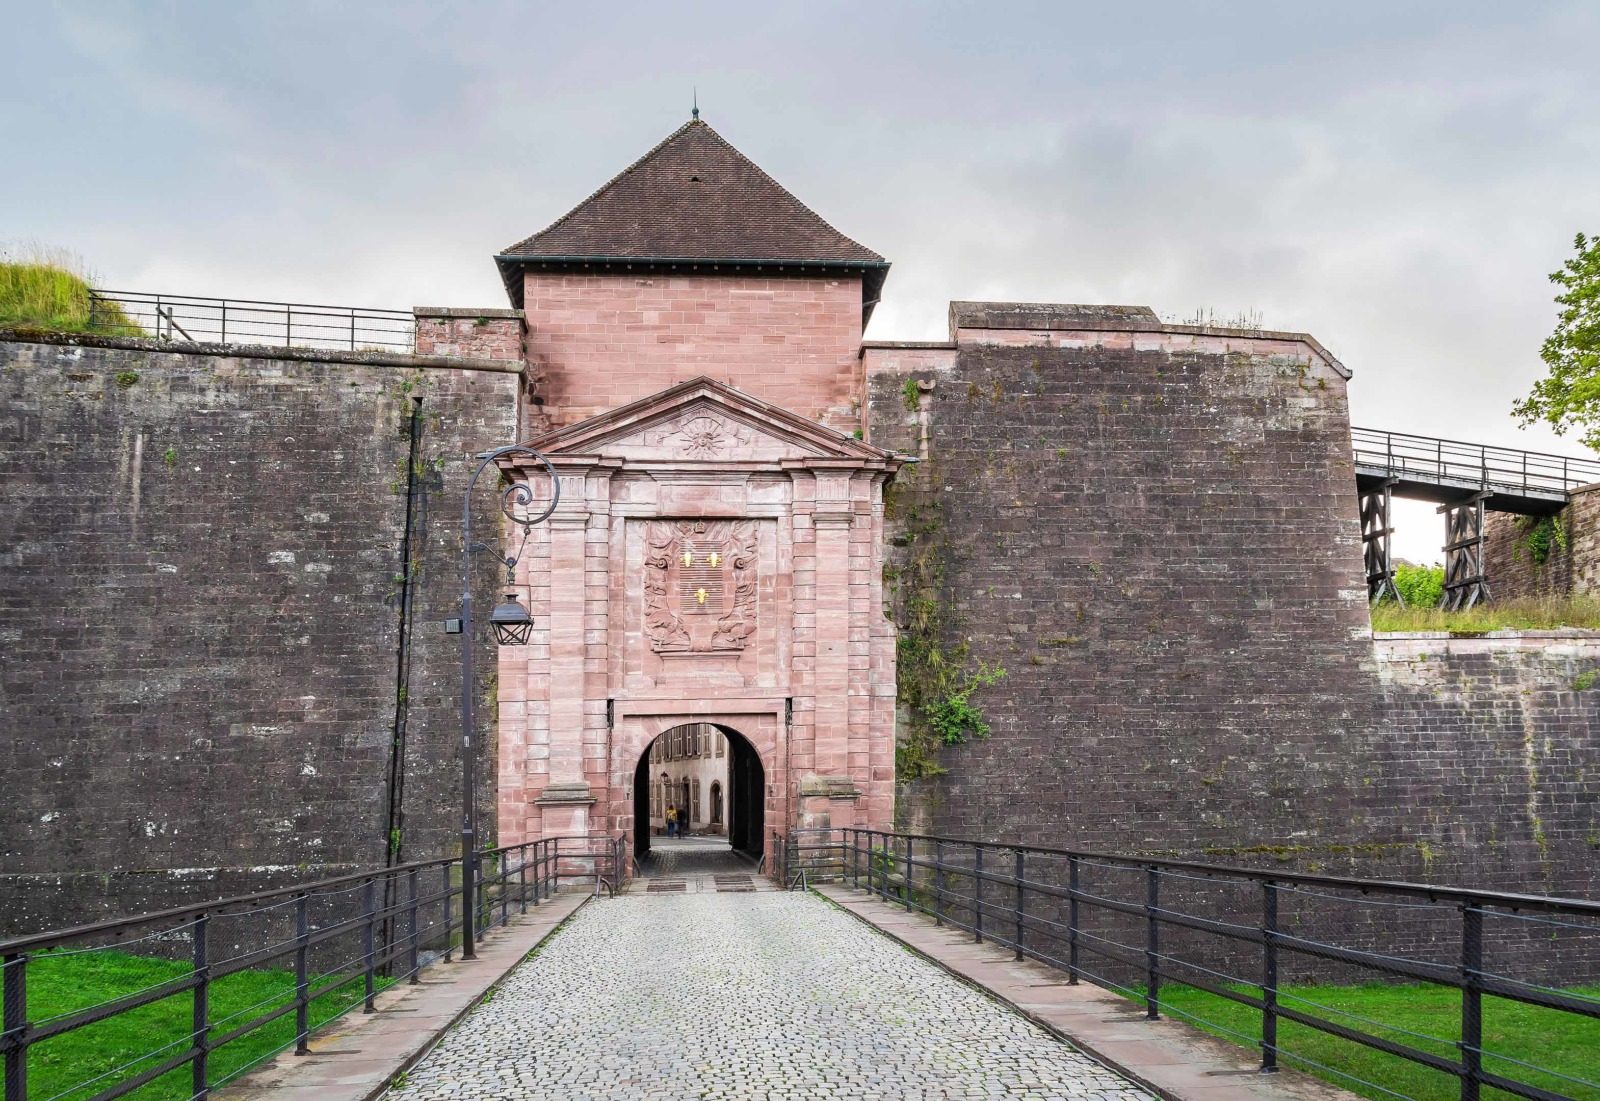 Fortified City Gates of Alsace - Porte de Brisach, Belfort © Krzysztof Golik - licence [CC BY-SA 4.0] from Wikimedia Commons